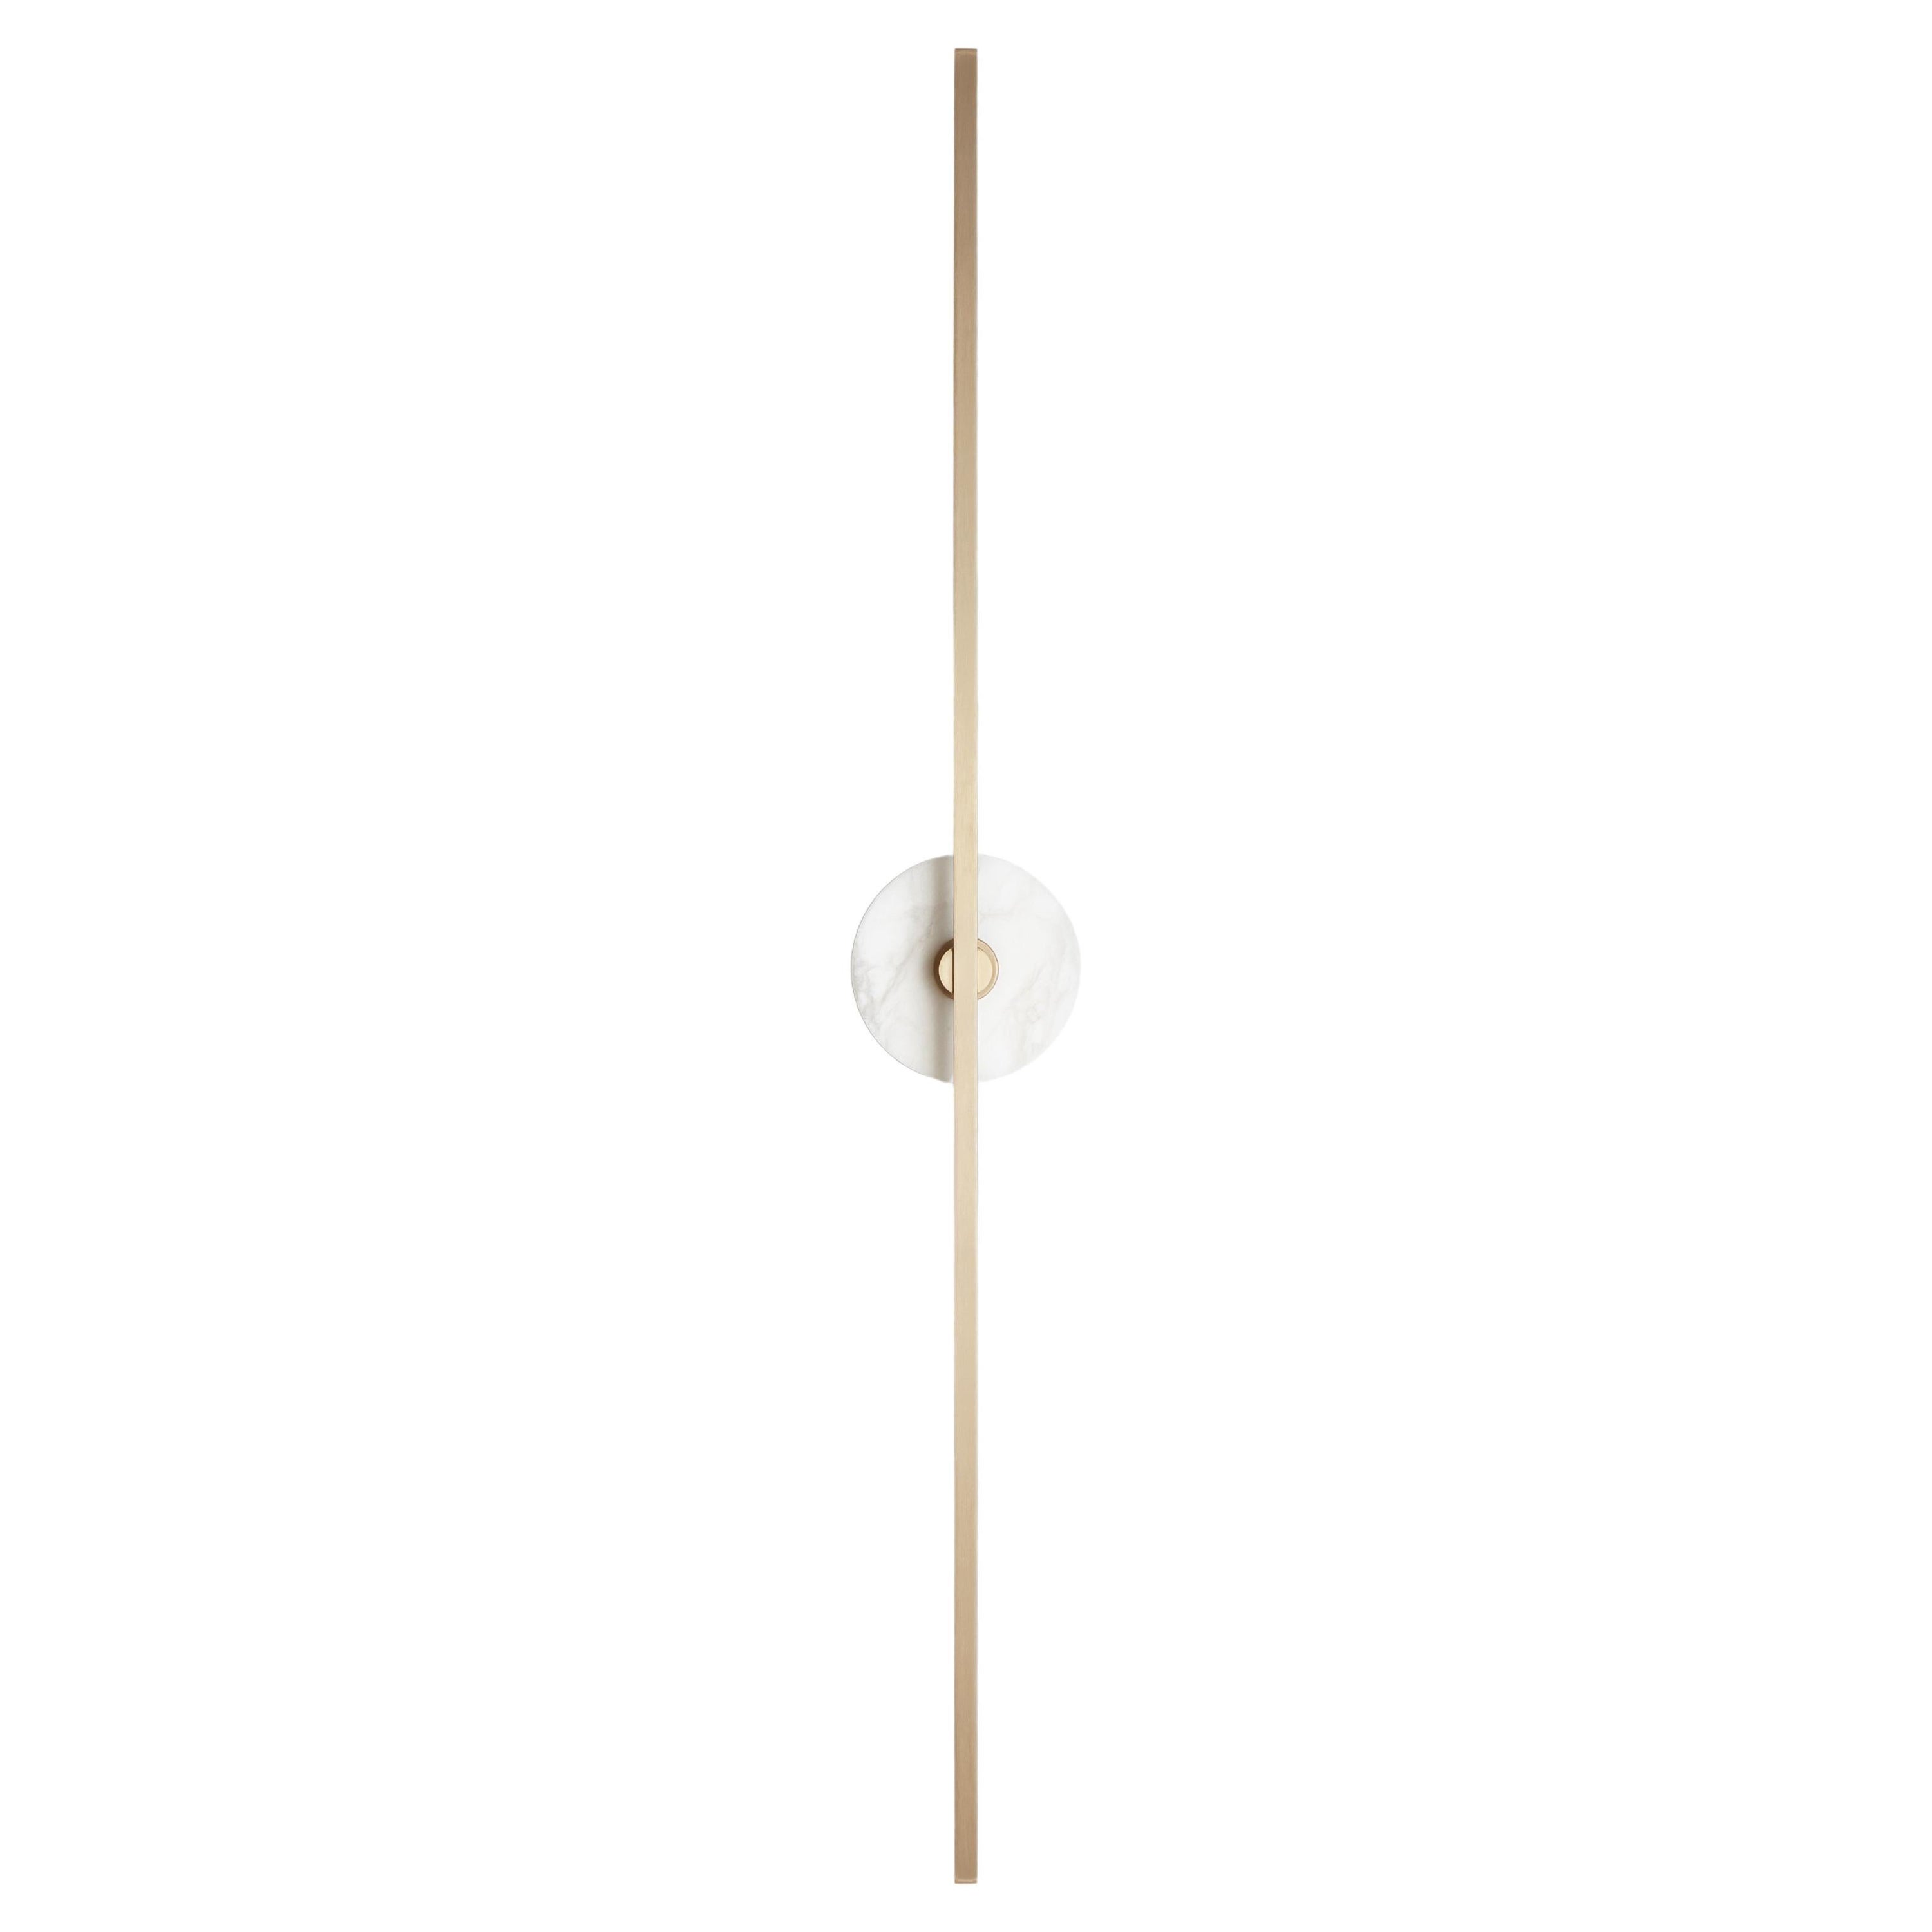 Essential Italian Wall Sconce " Grand Stick", Brass and Alabaster For Sale